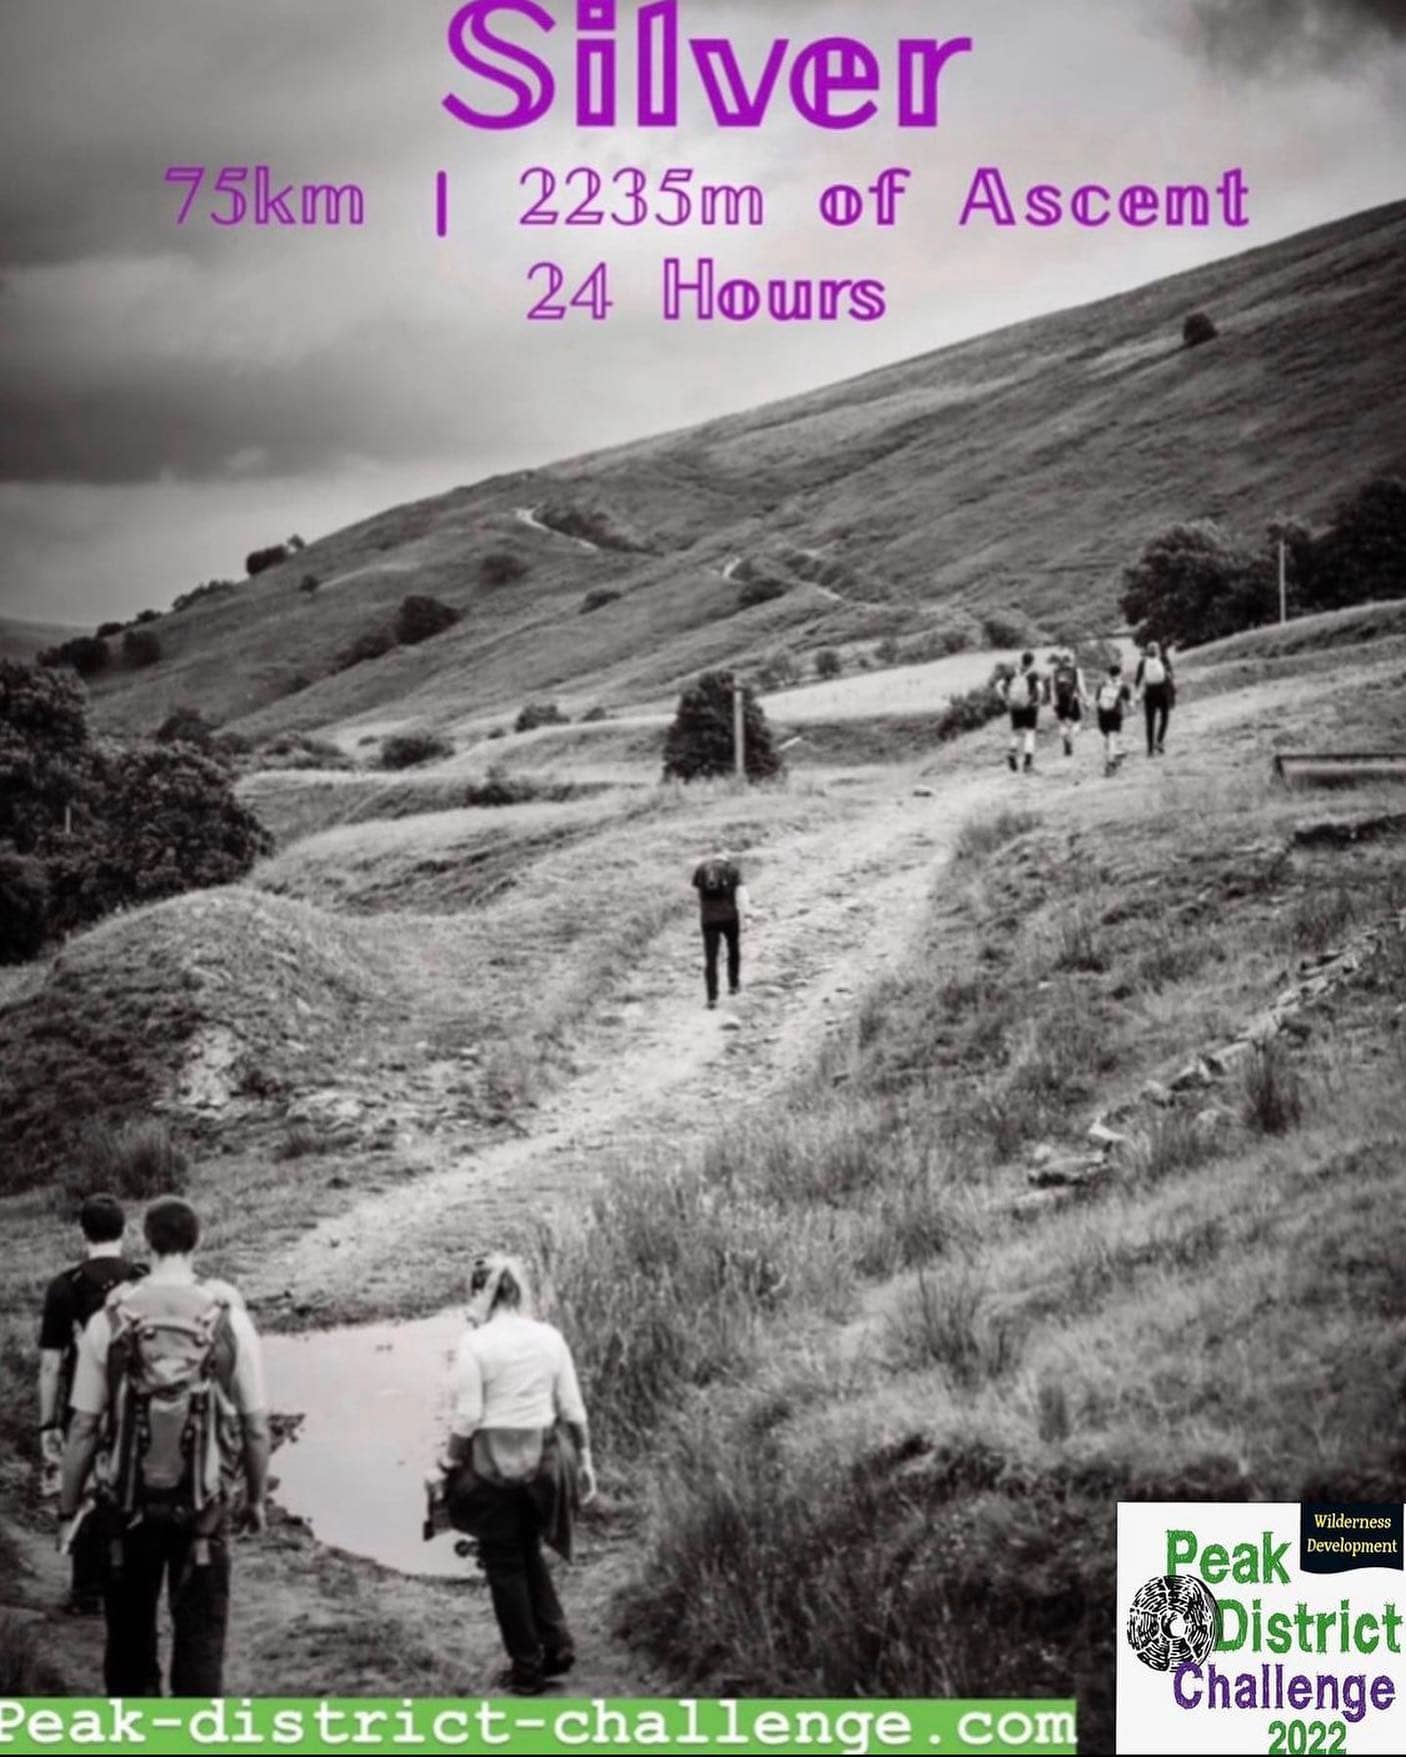 Register now for the Peak-District-Challenge.com 75km Silver Challenge for only £67 in total. 

B...